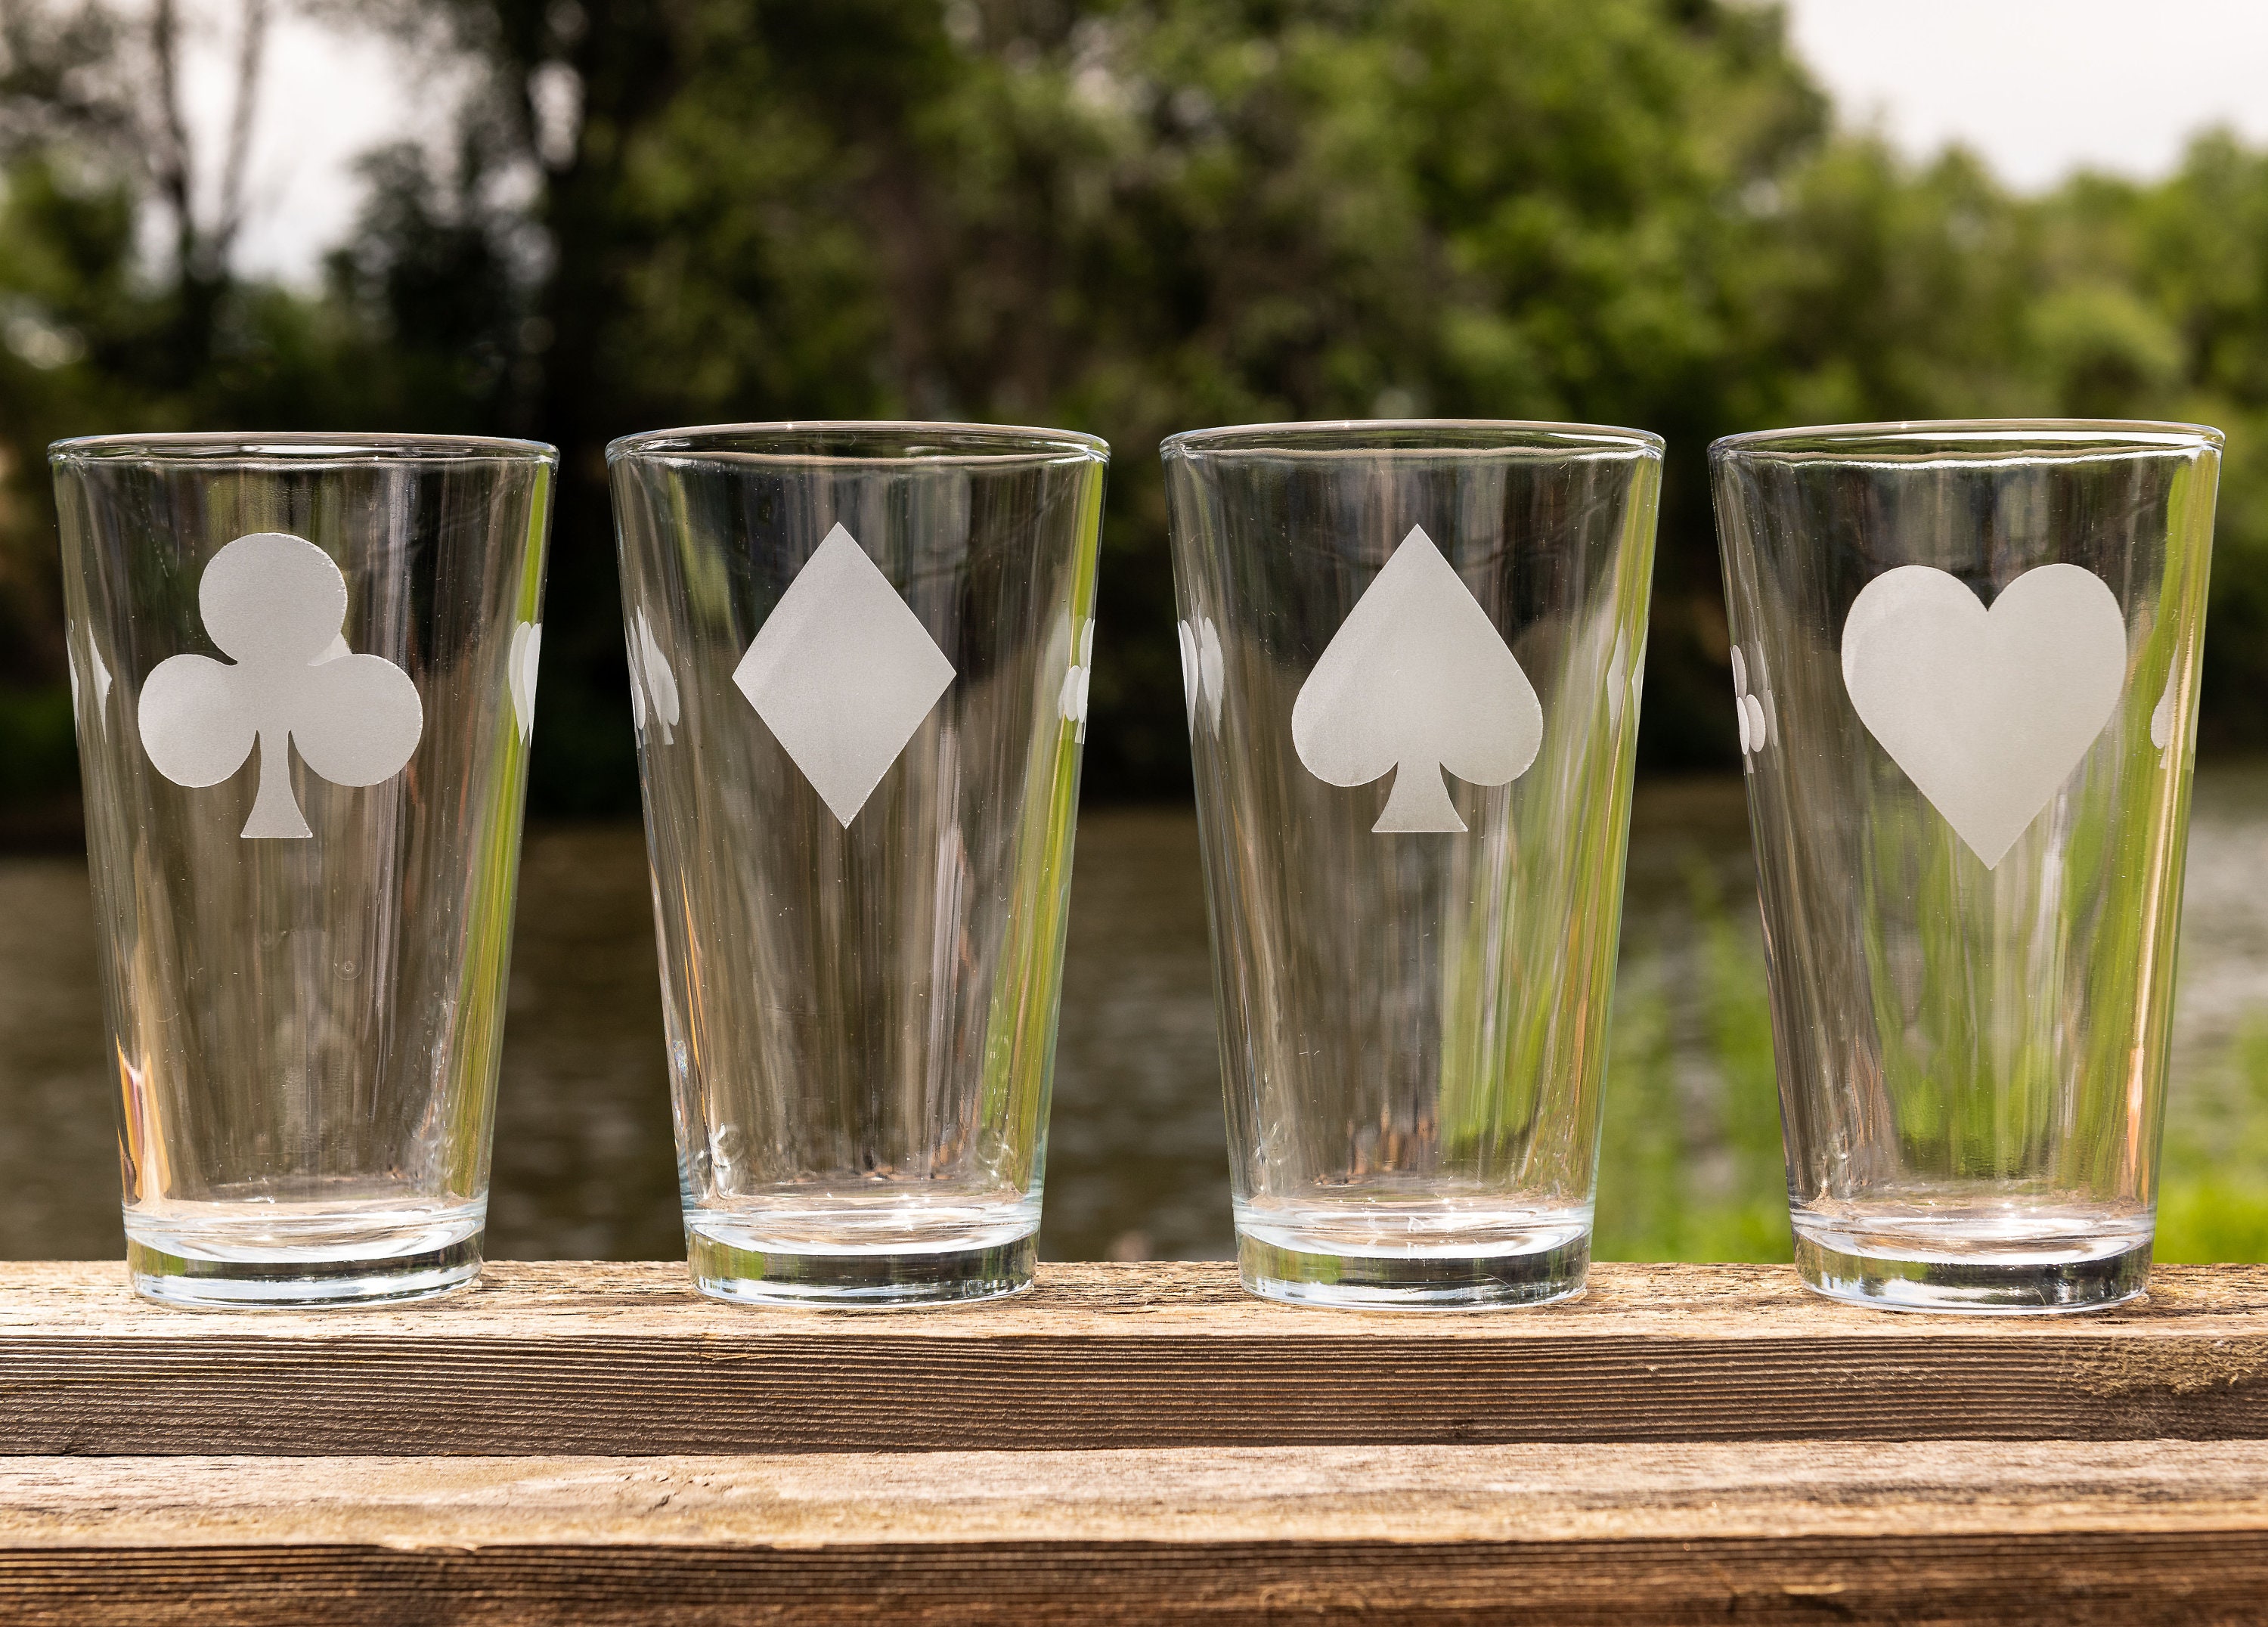 Pint Beer Glasses for Poker, Drinking Cups Set of 2 for Man Cave Card  Games, Beer Gifts for Men for Home Bar, Playing Card Suit Freezer Mugs  15oz, Texas Holdem Casino Glassware 